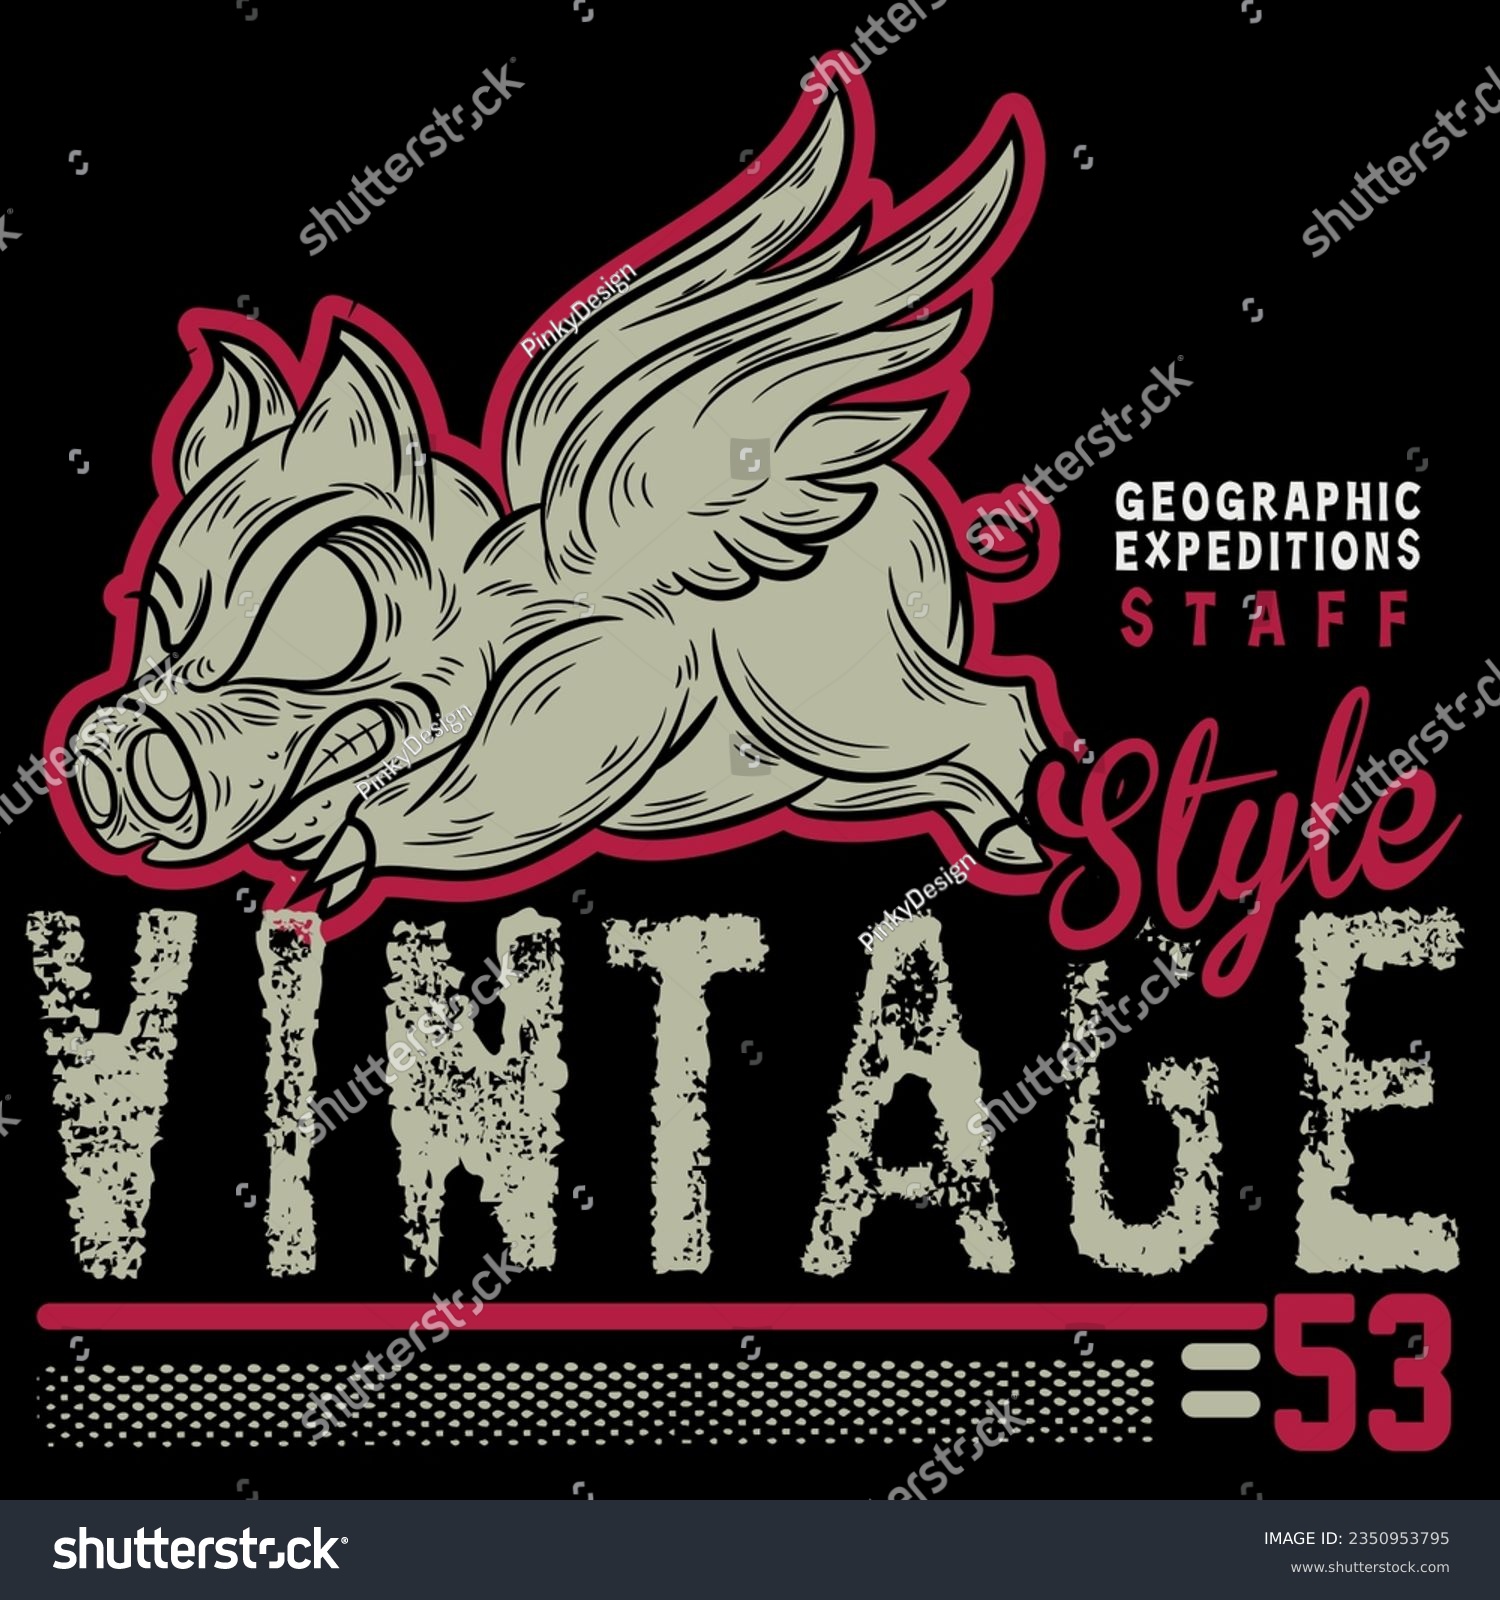 SVG of Illustration bike motorcycle with ping and wings, Since 1965 and Patchwork emblem crest text Vintage Style 53. tattoo style svg